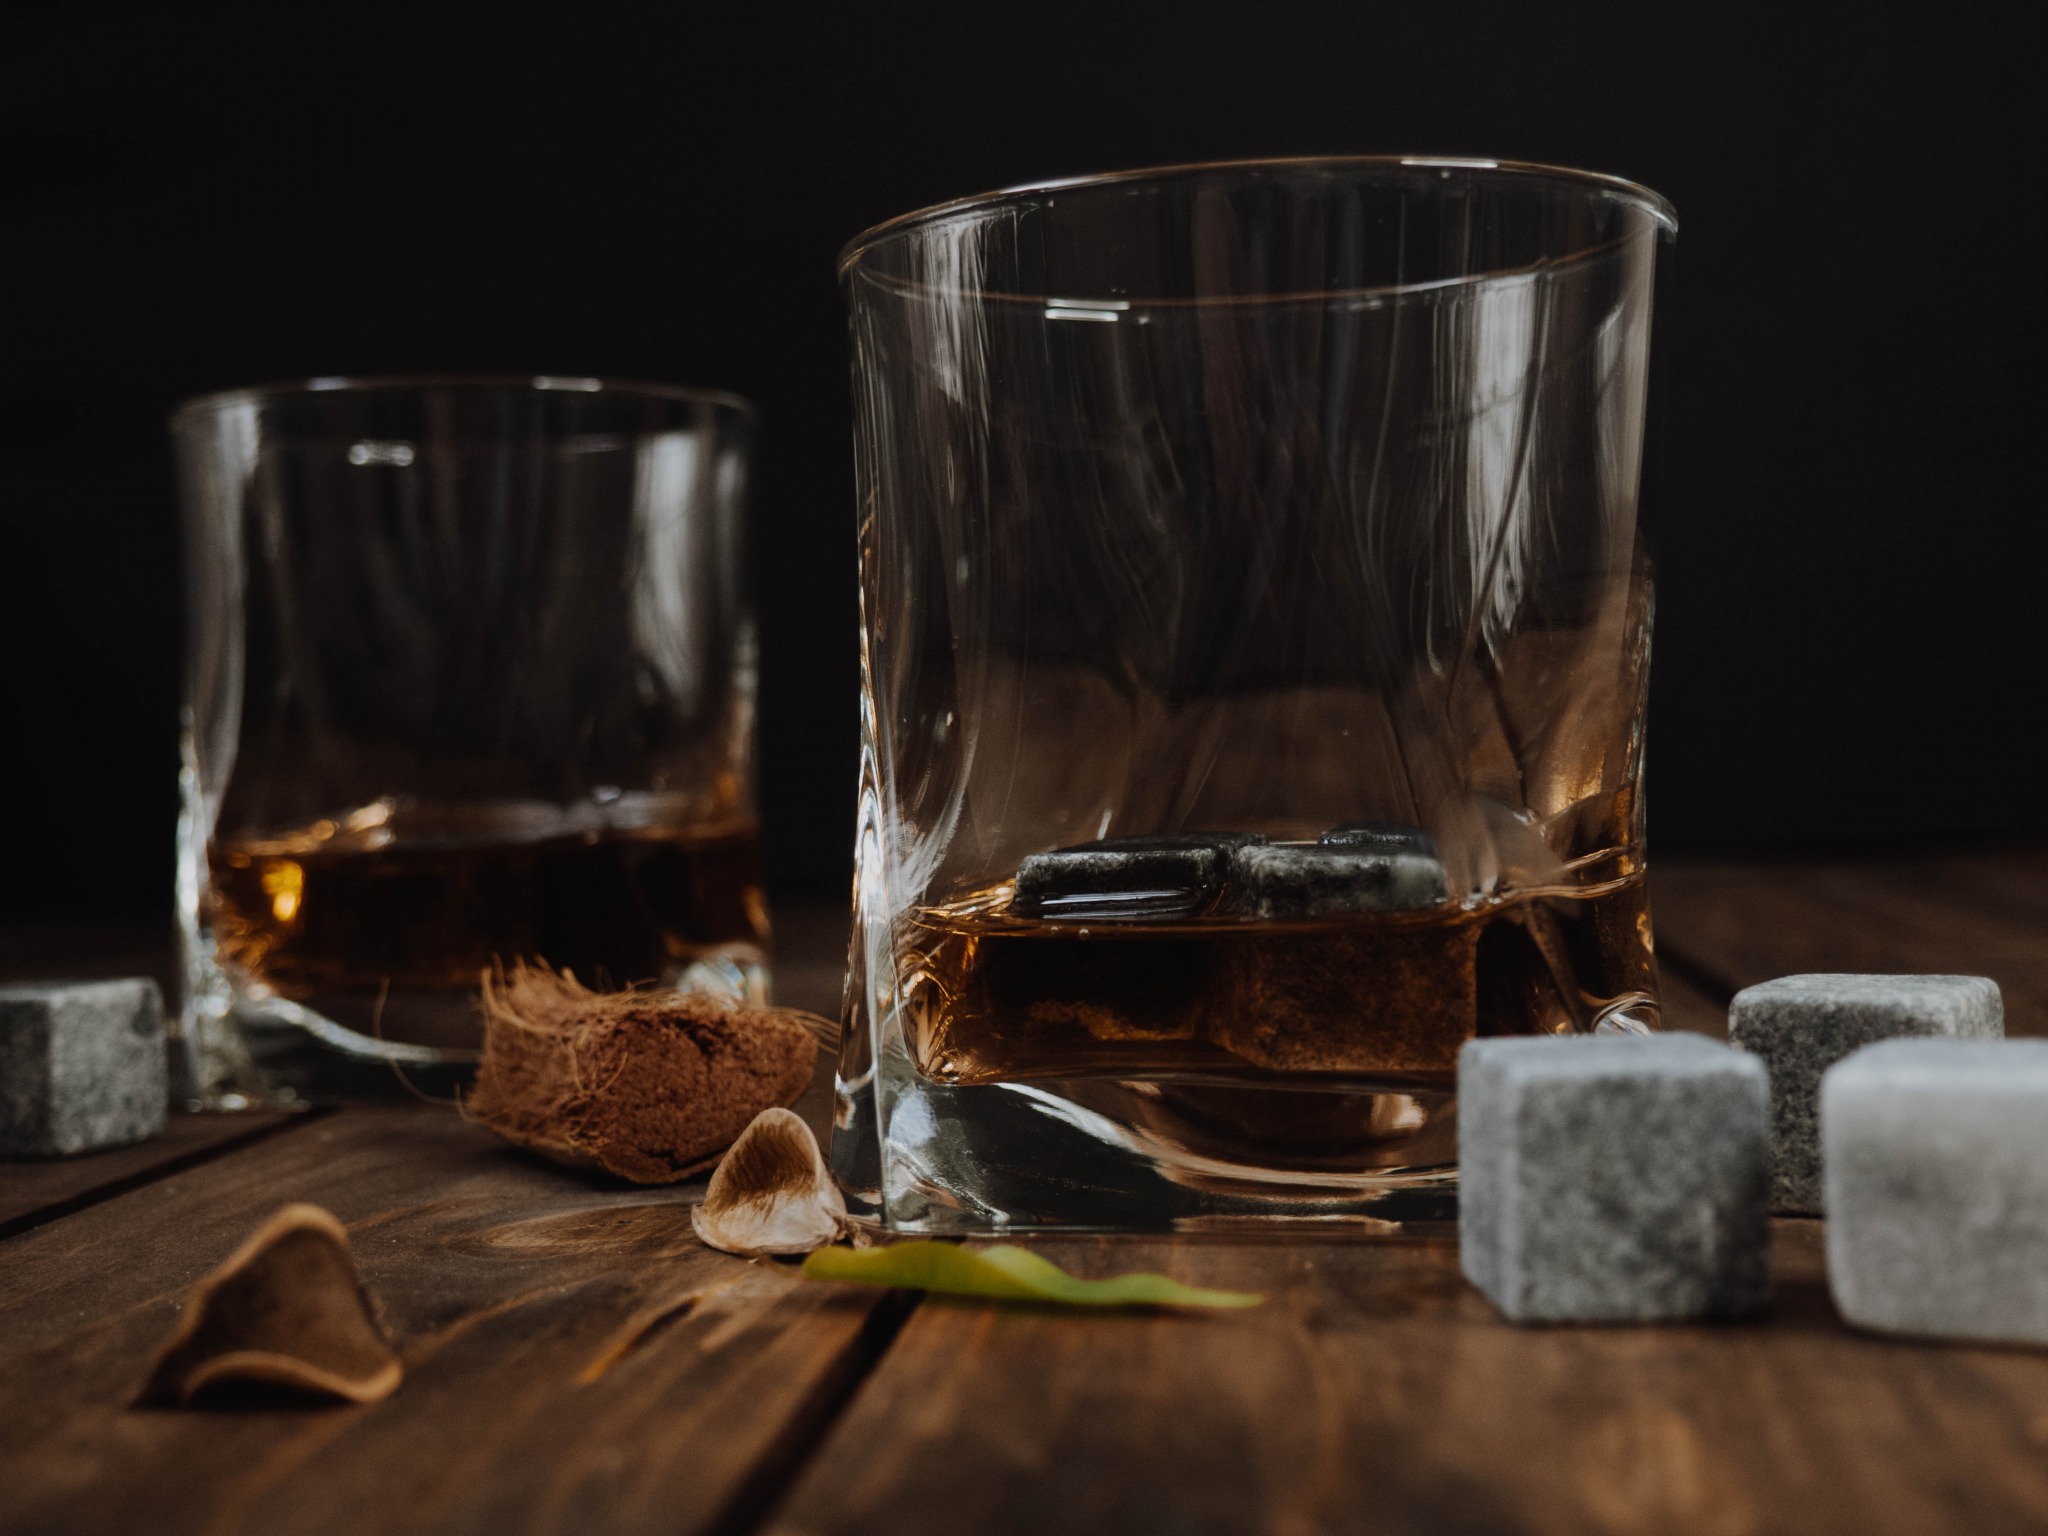 https://boguesounddistillery.com/wp-content/uploads/2020/05/clear-drinking-glass-with-whiskey-3912220.jpg